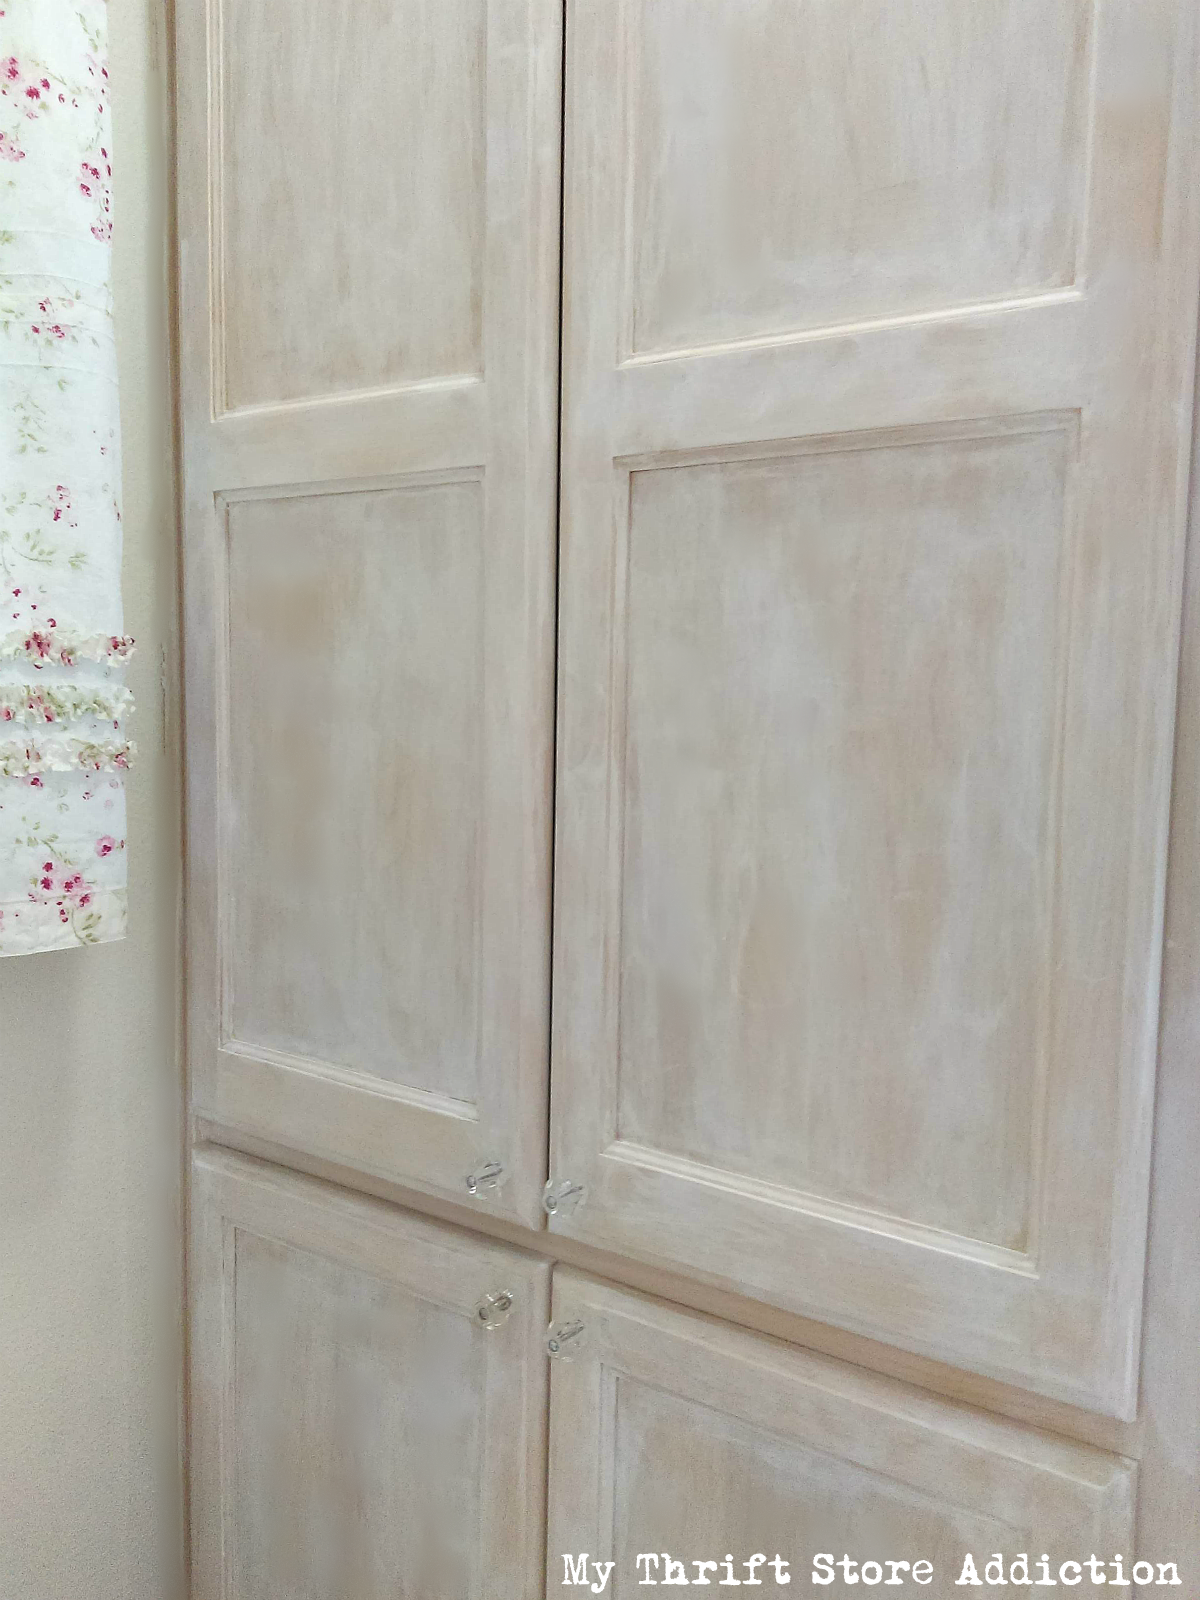 How To Whitewash Cabinets And Doors Bathroom Update Part Iii My